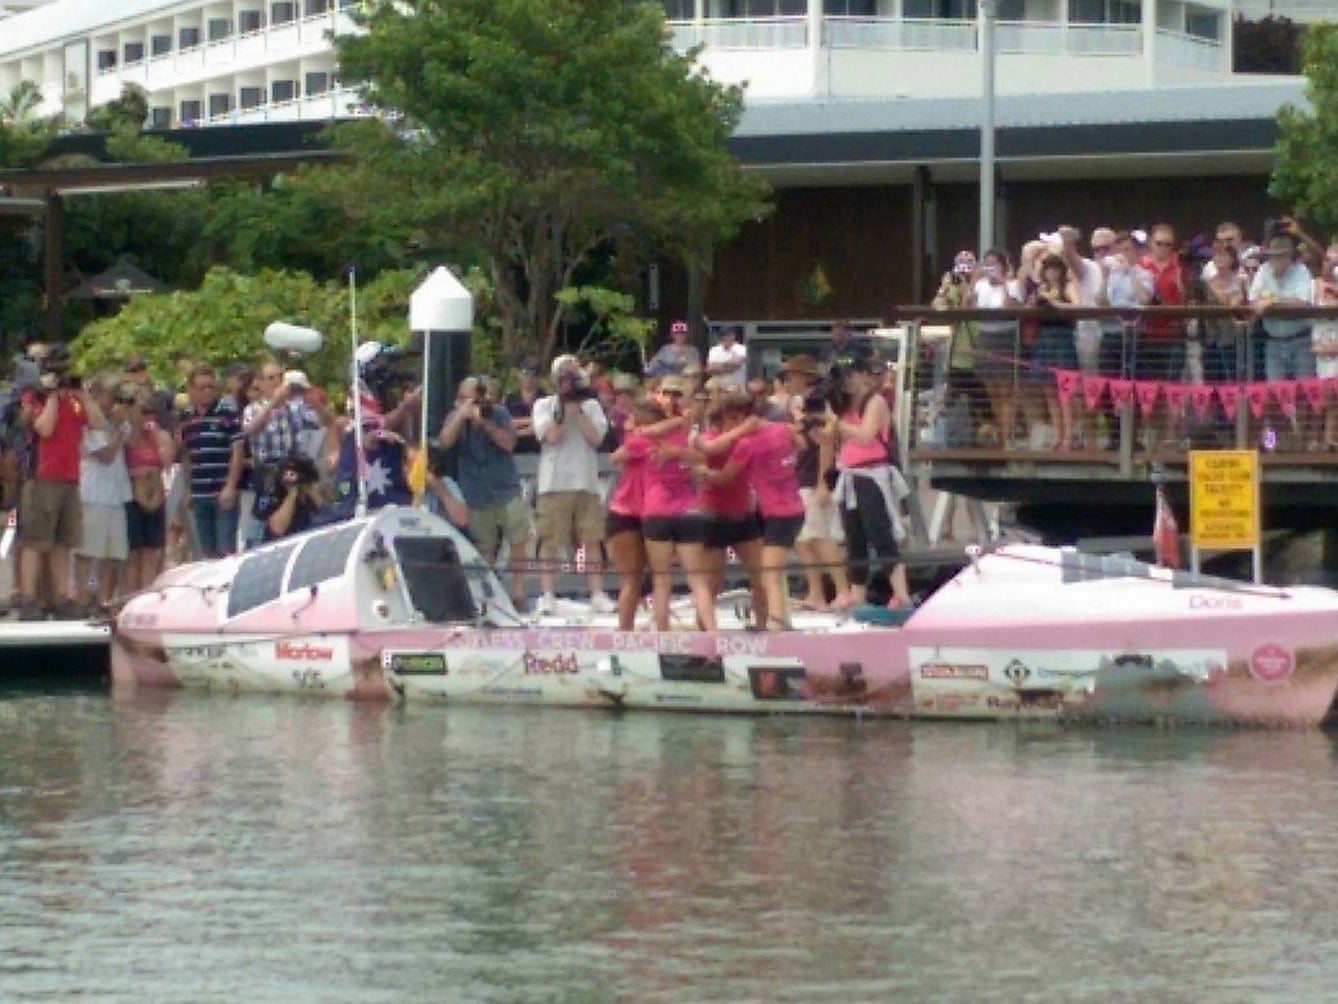 The Coxless Crew finish their journey in Australia Facebook